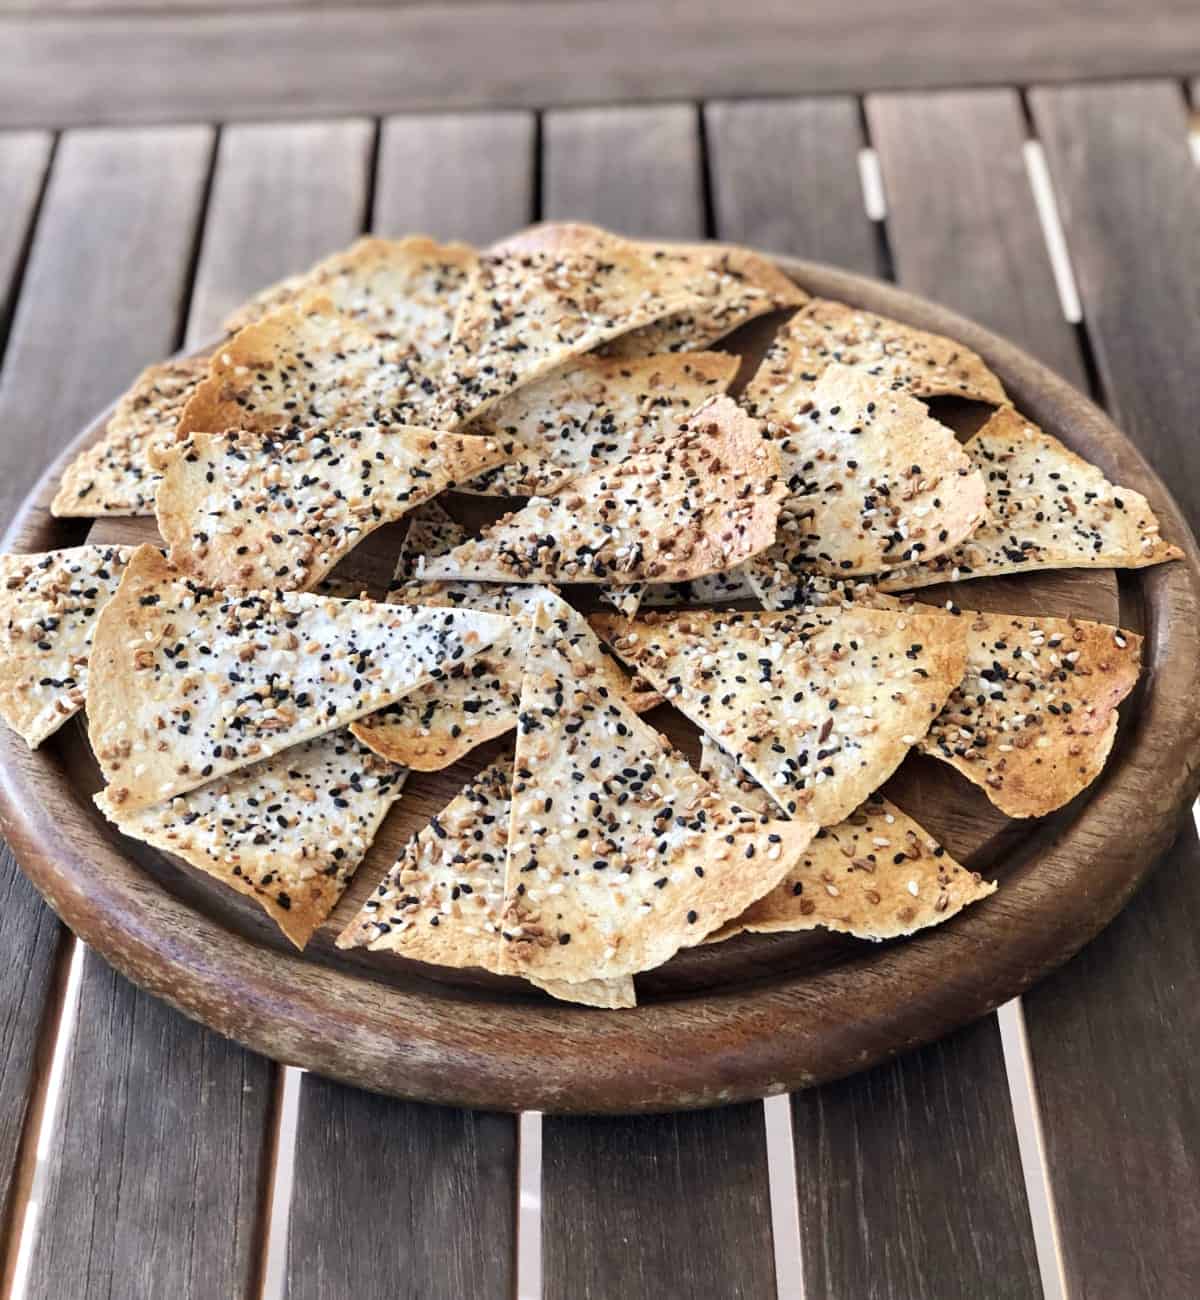 Everything but the bagel seasoned tortilla chips on wood serving platter on wooden table.